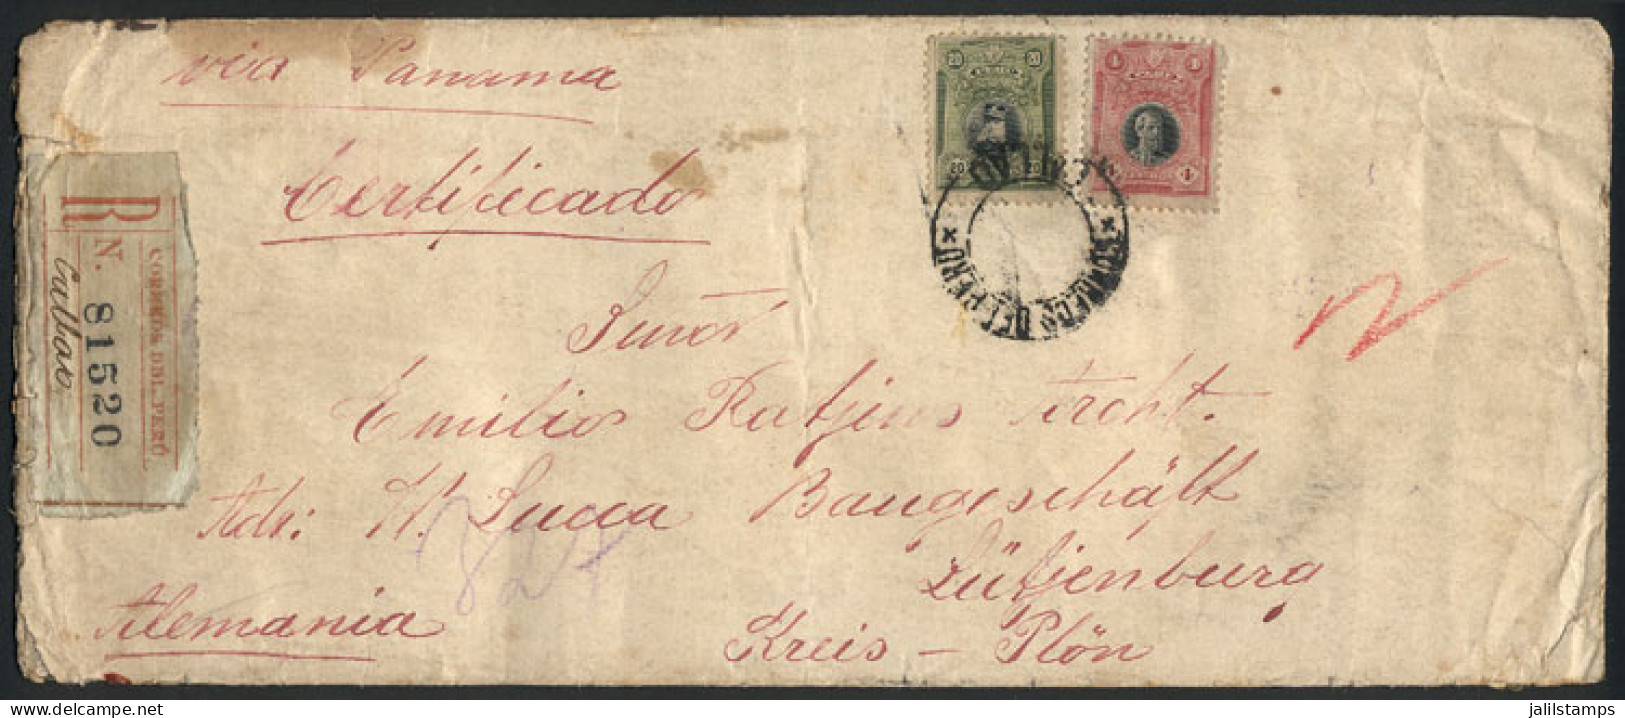 PERU: Registered Cover Sent From CALLAO To Germany In JUL/1920 Franked With 24c., With Panamá Transit And Arrival Backst - Perú